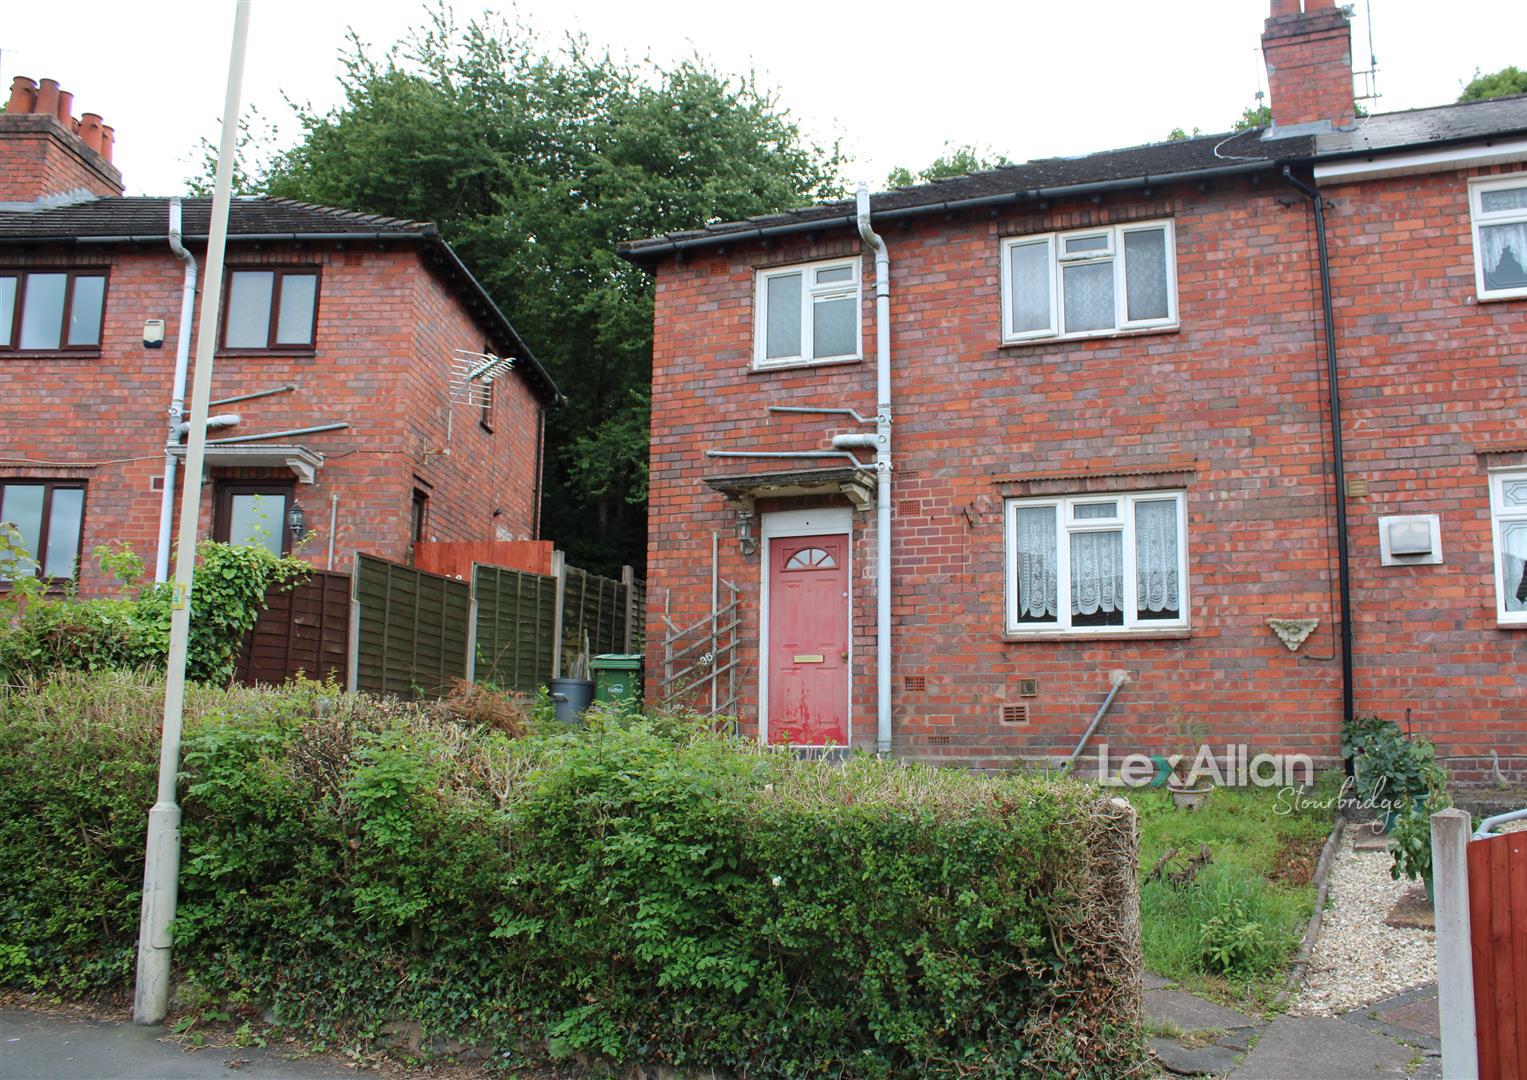 3 bed  for sale in Central Avenue, Stourbridge, DY9 